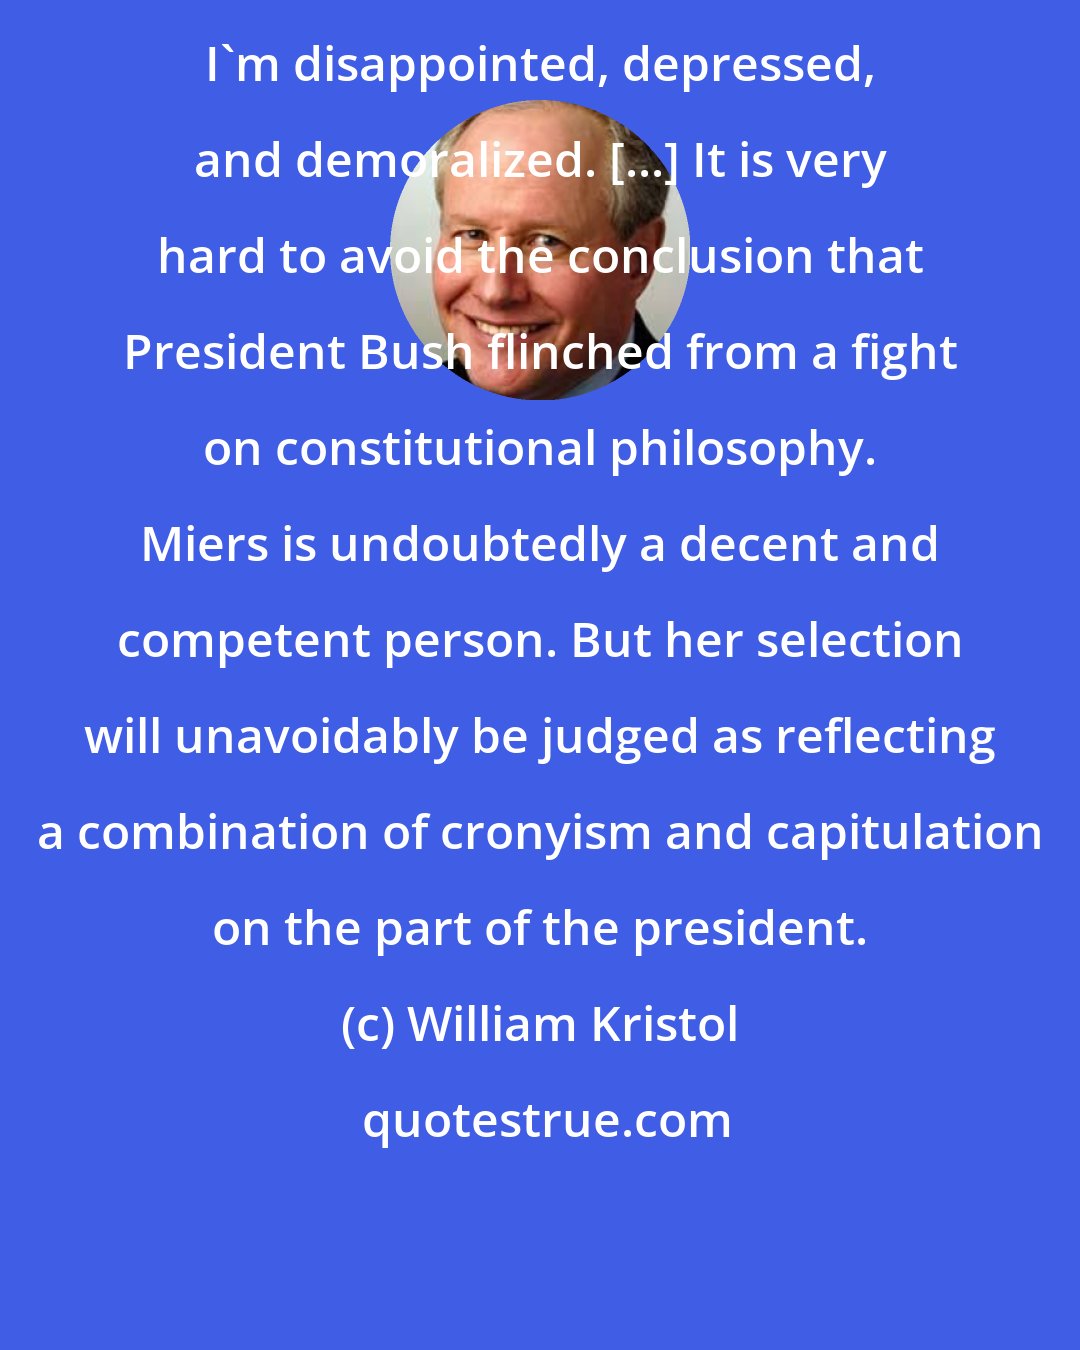 William Kristol: I'm disappointed, depressed, and demoralized. [...] It is very hard to avoid the conclusion that President Bush flinched from a fight on constitutional philosophy. Miers is undoubtedly a decent and competent person. But her selection will unavoidably be judged as reflecting a combination of cronyism and capitulation on the part of the president.